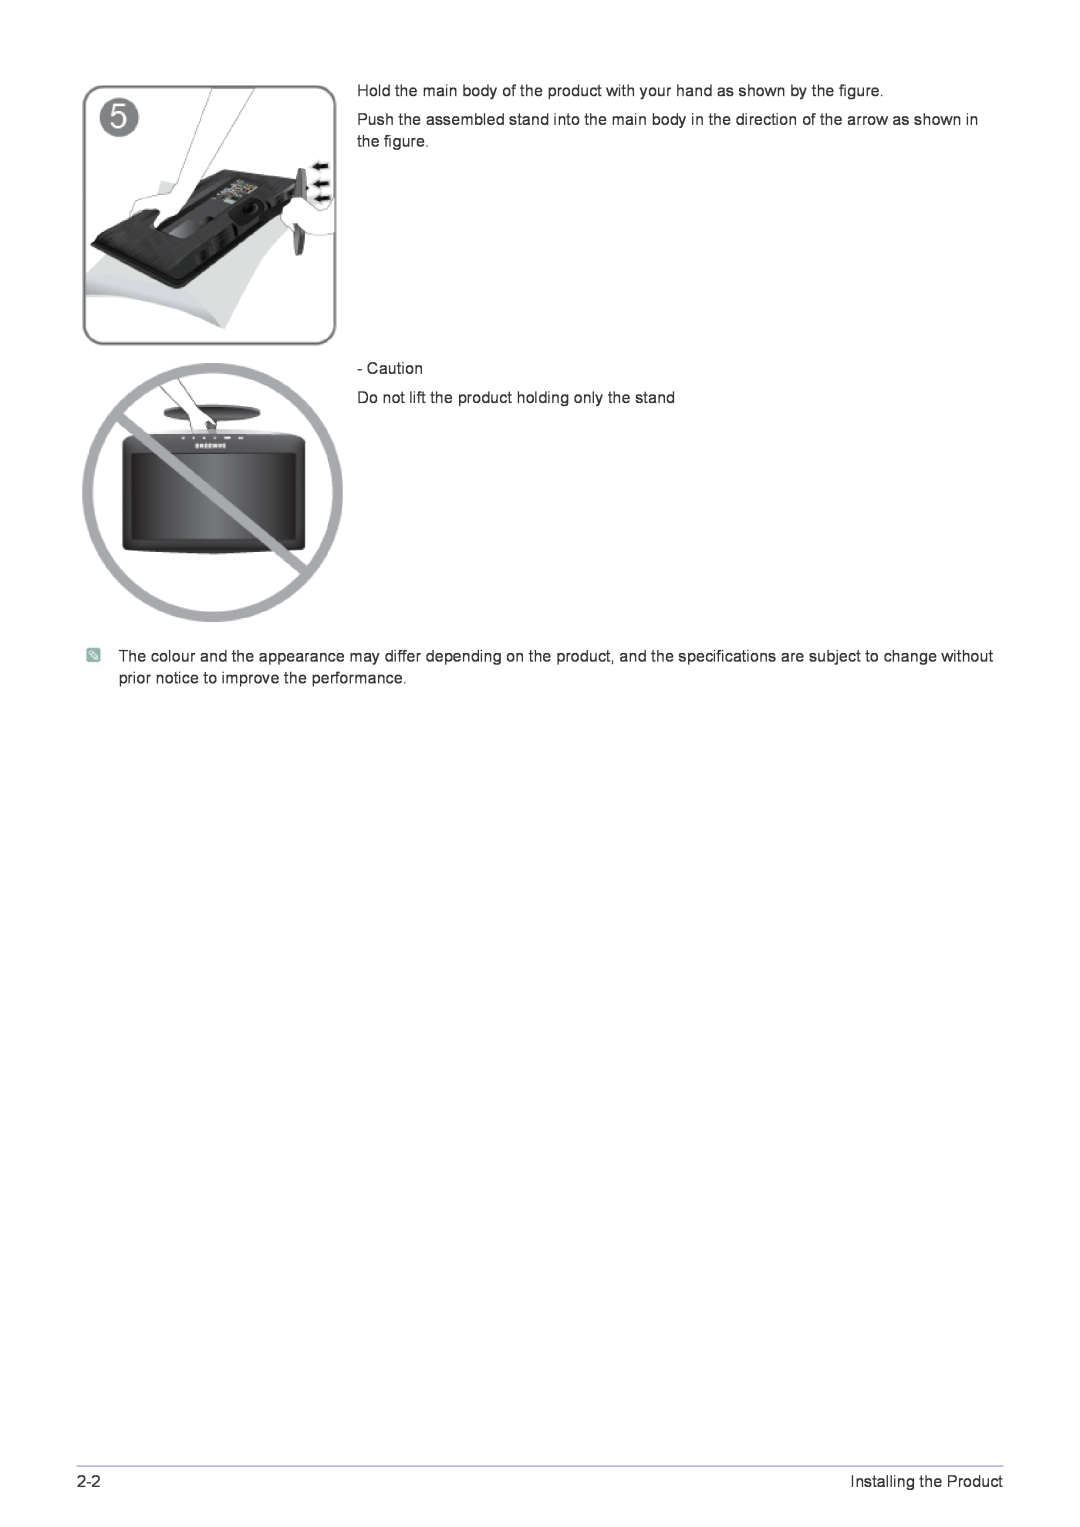 Samsung B2330HD, B2430HD, B1930HD, B2230HD, B2030HD user manual Do not lift the product holding only the stand 